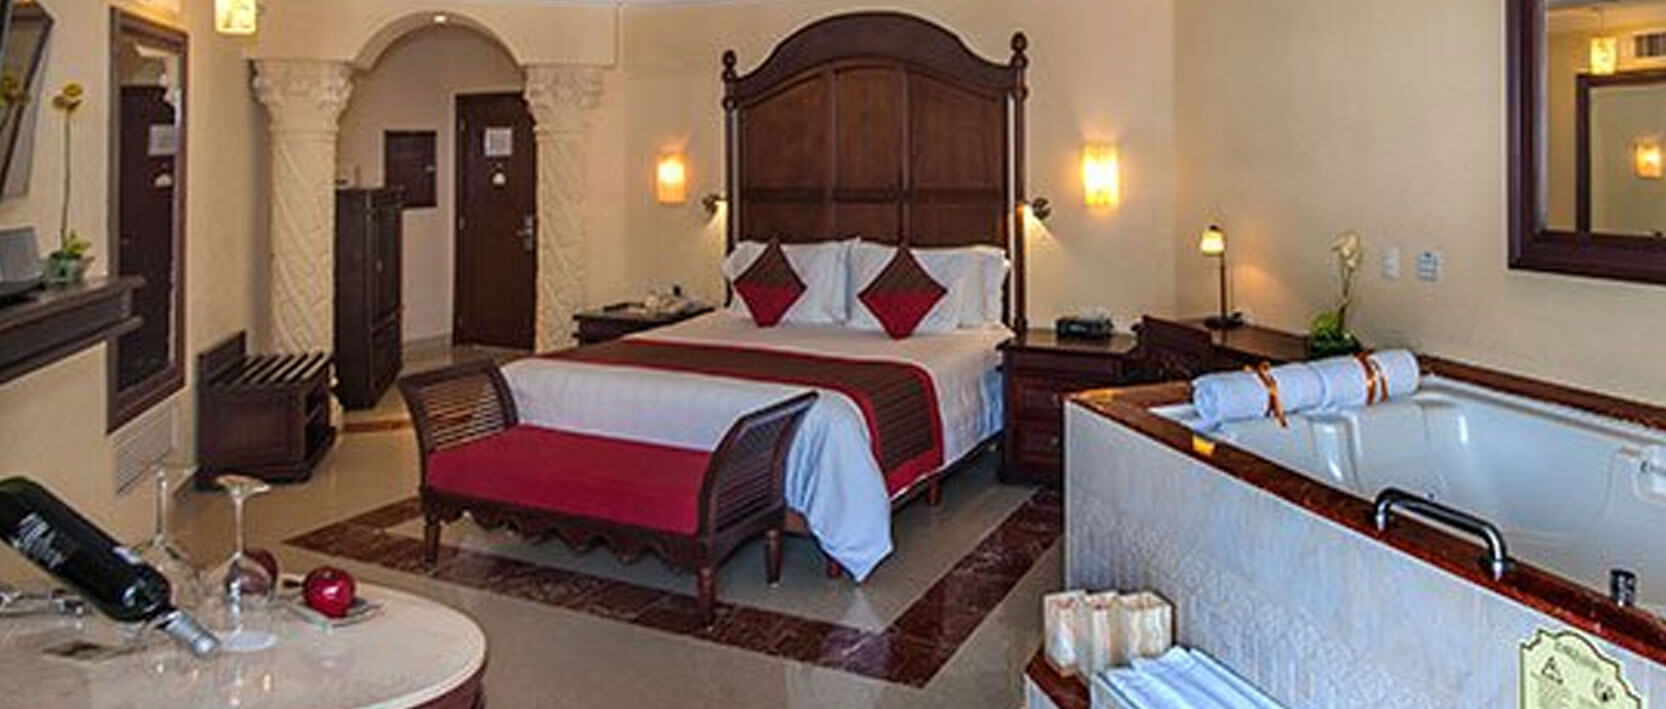 The Royal Playa Del Carmen Accommodations - Royal Junior Suite Central Garden View